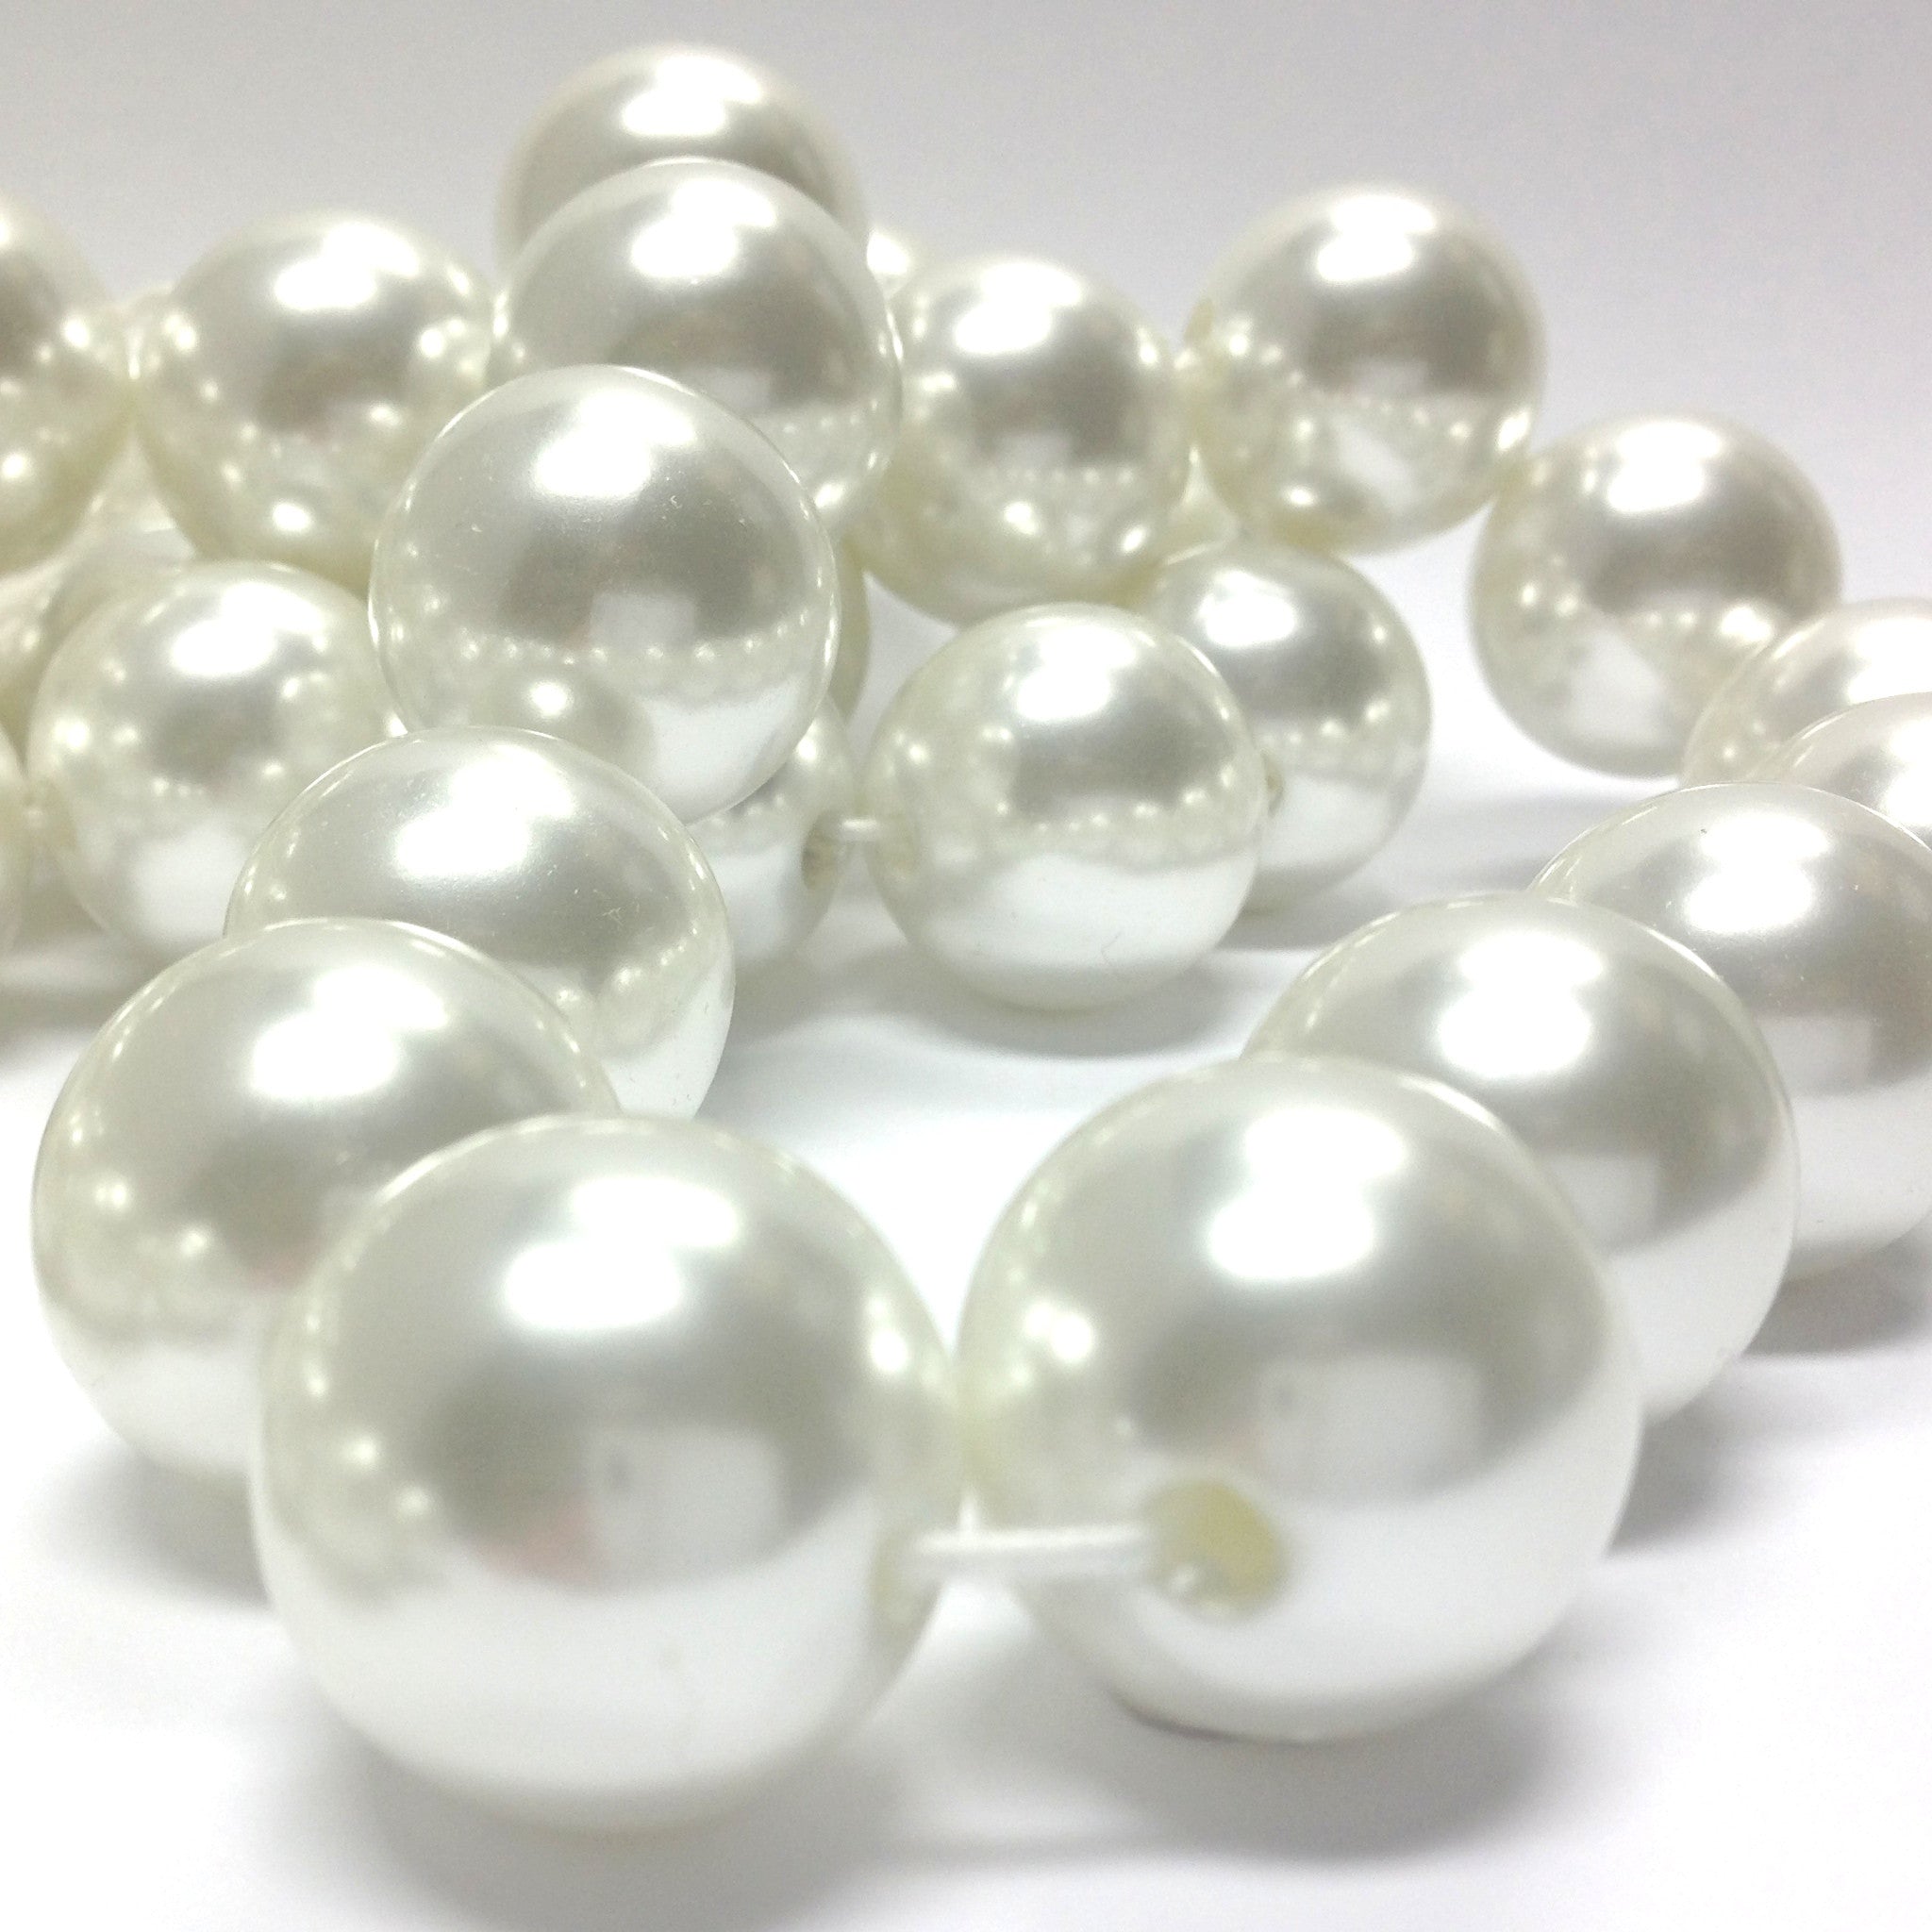 Letter Beads, size 7 mm, hole size 1,2 mm, white, 25 g/ 1 pack